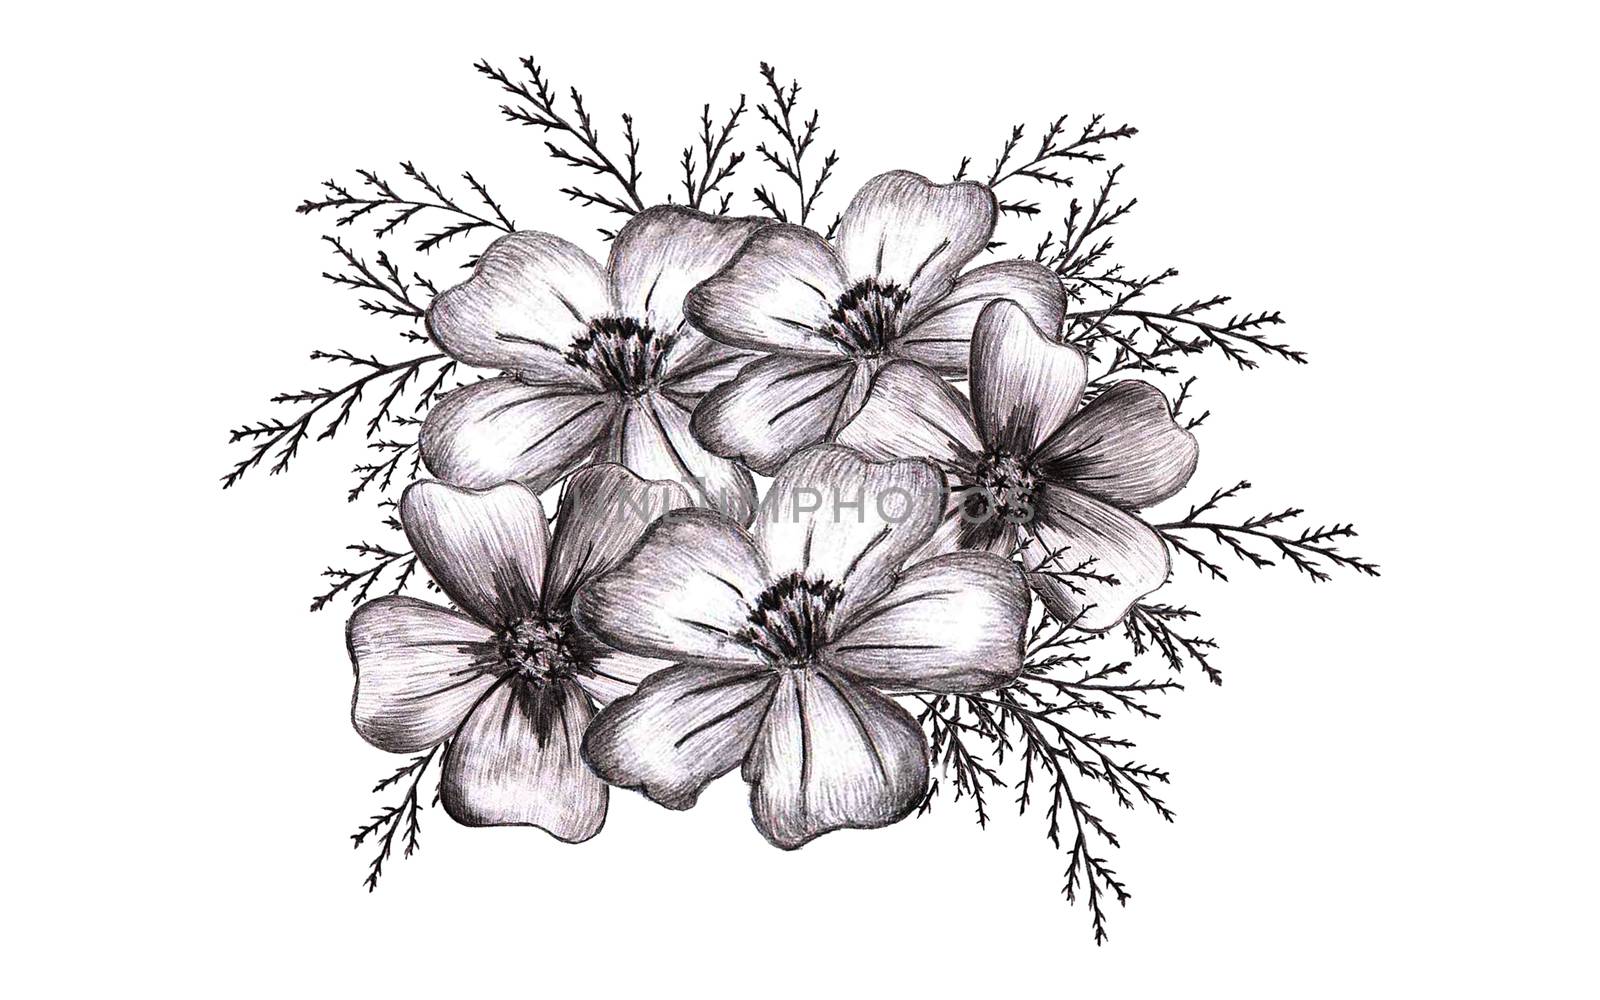 Black and White Hand-Drawn Flower. Thin-leaved Marigolds Sketch Composition. by Rina_Dozornaya